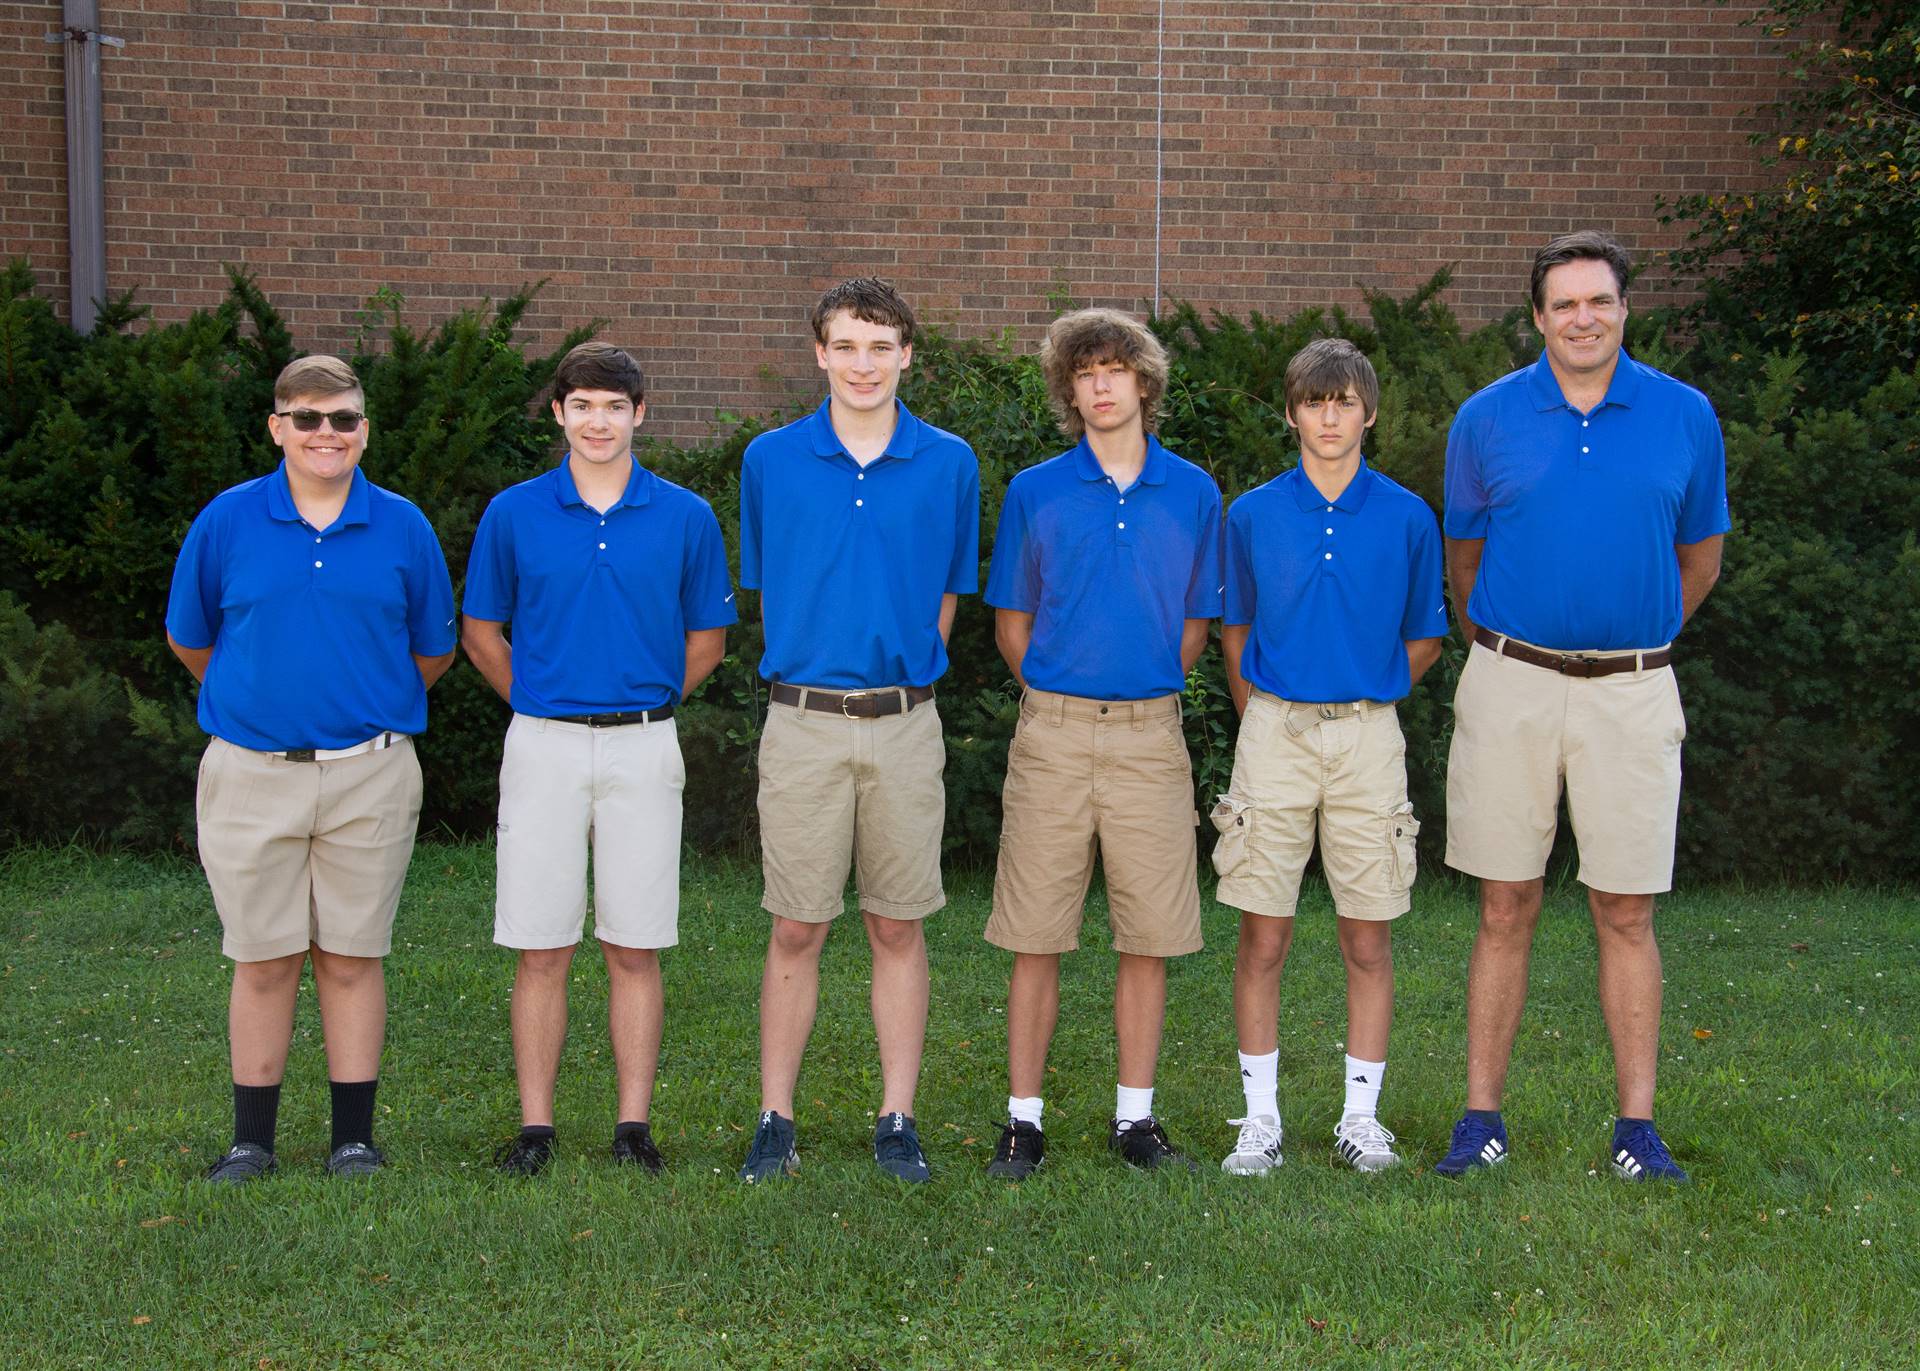 Charger Golf Team